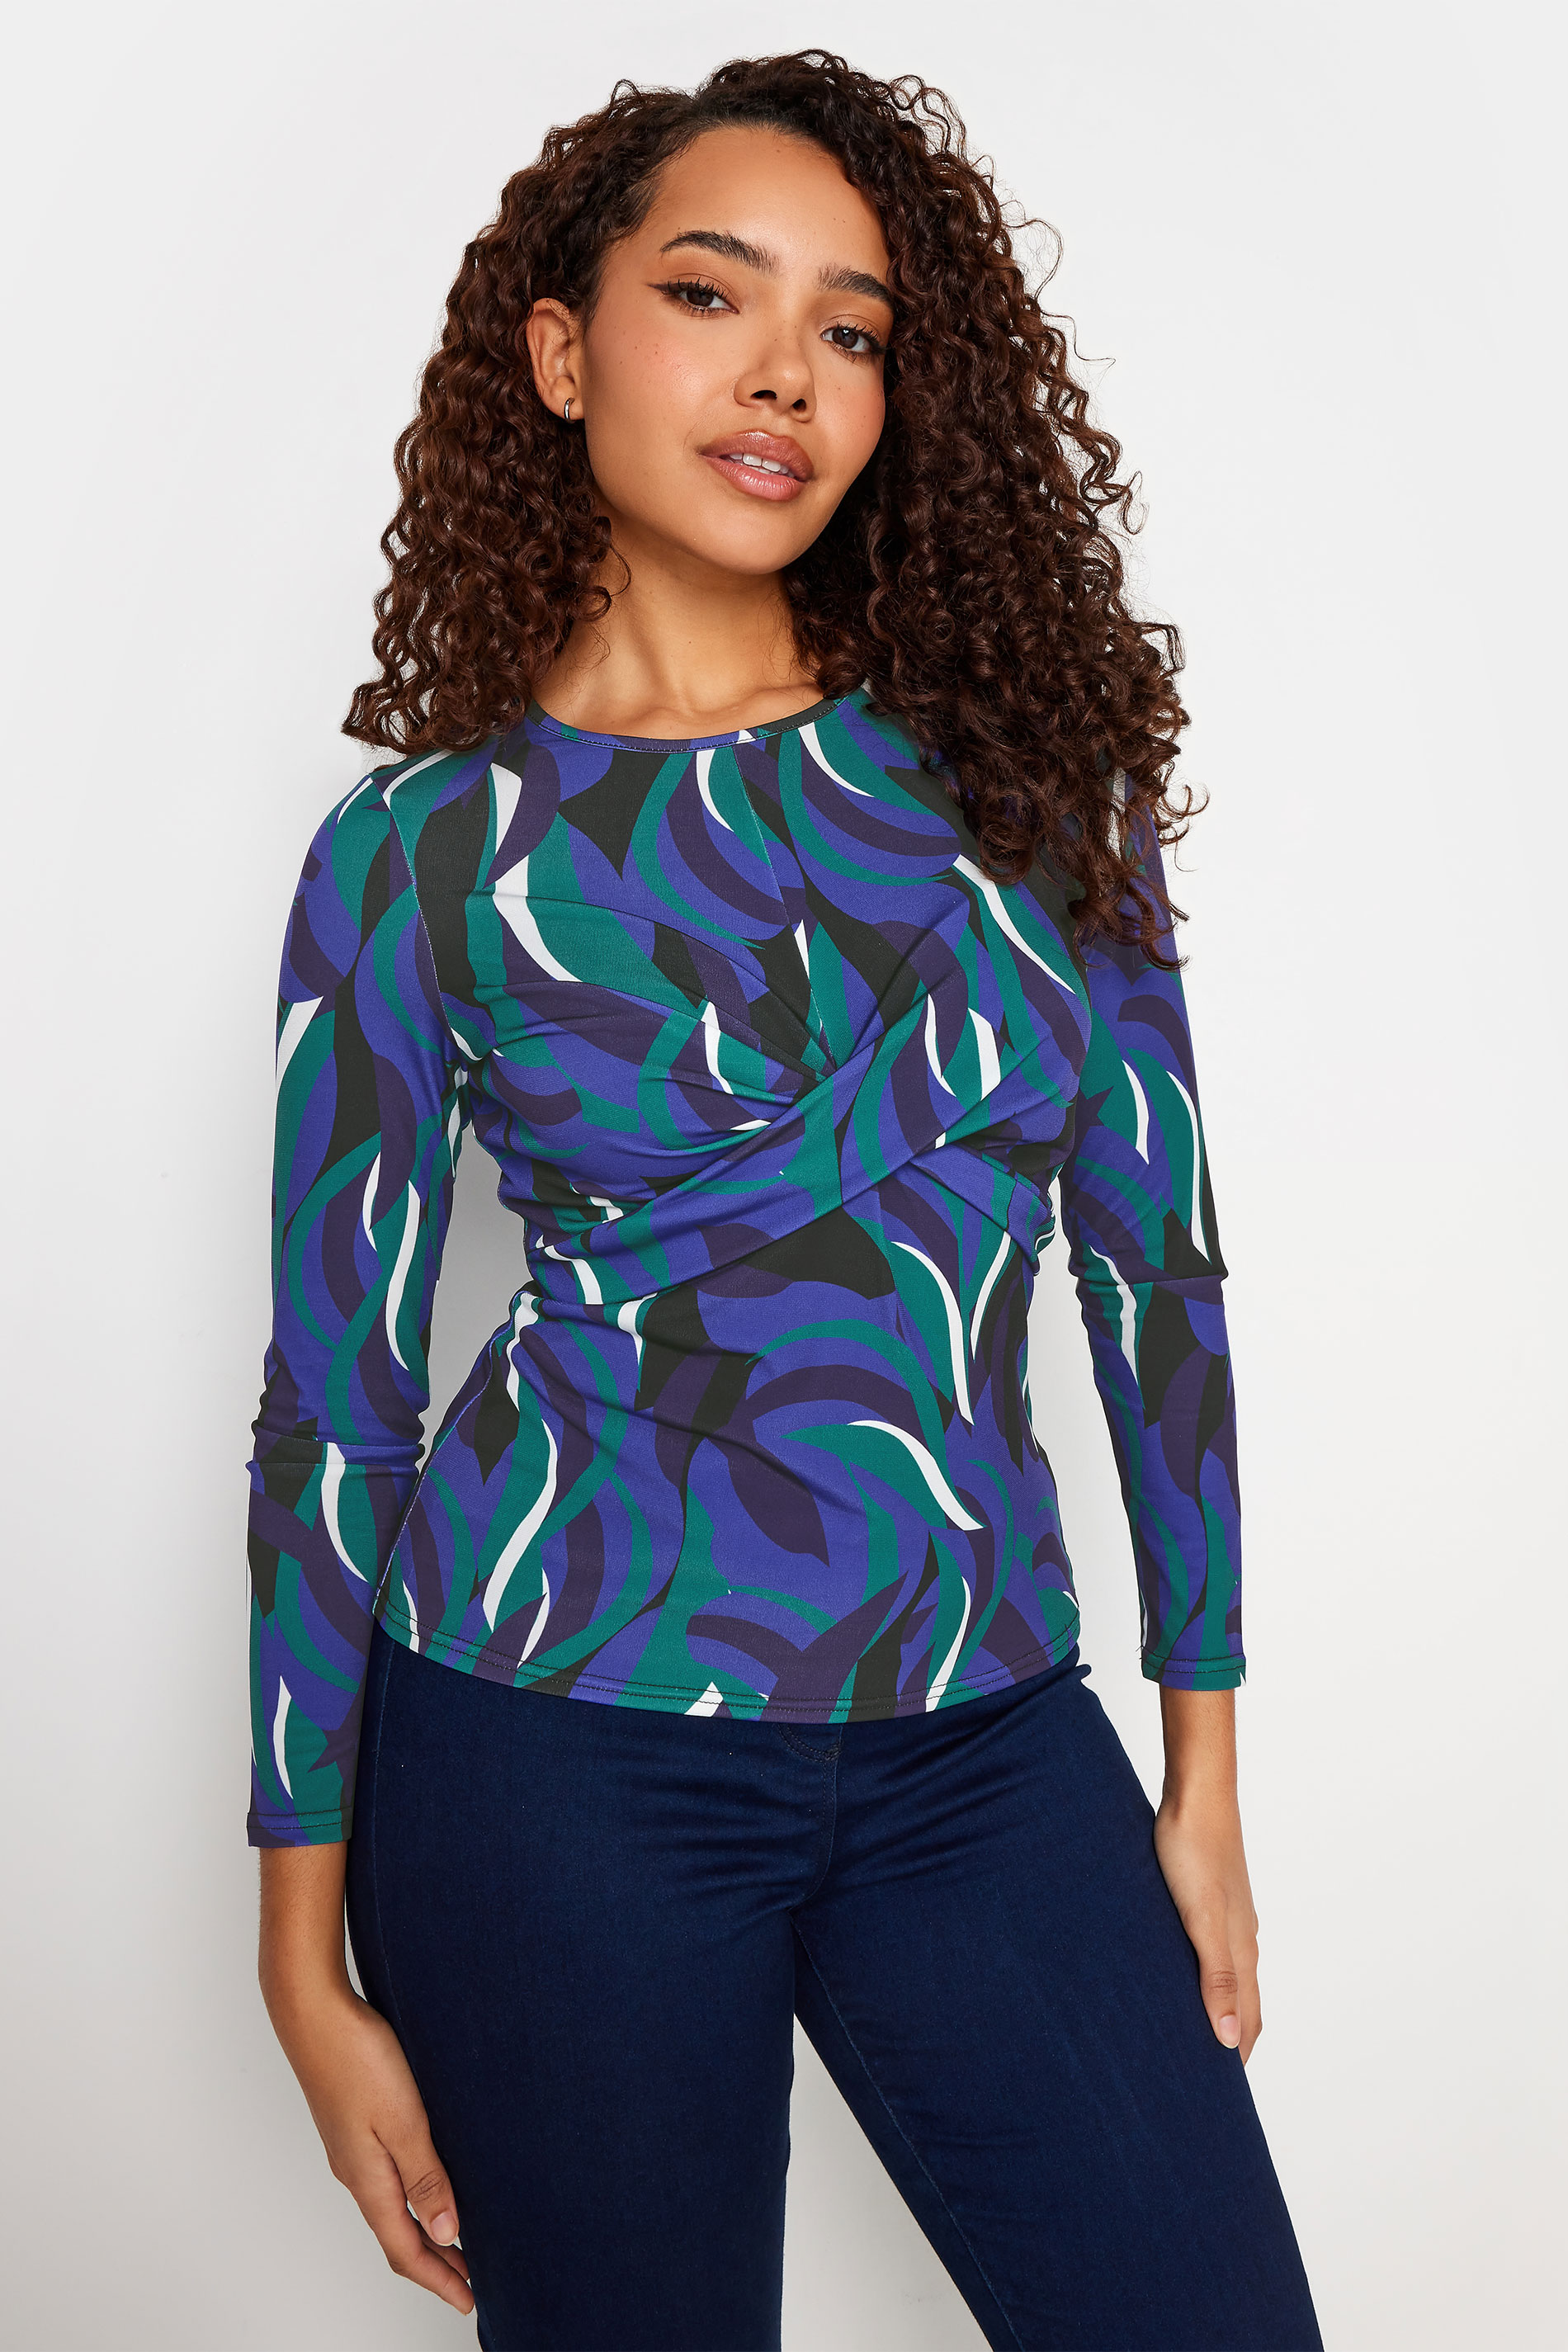 M&Co Blue & Green Abstract Print Twist Top | M&Co 1